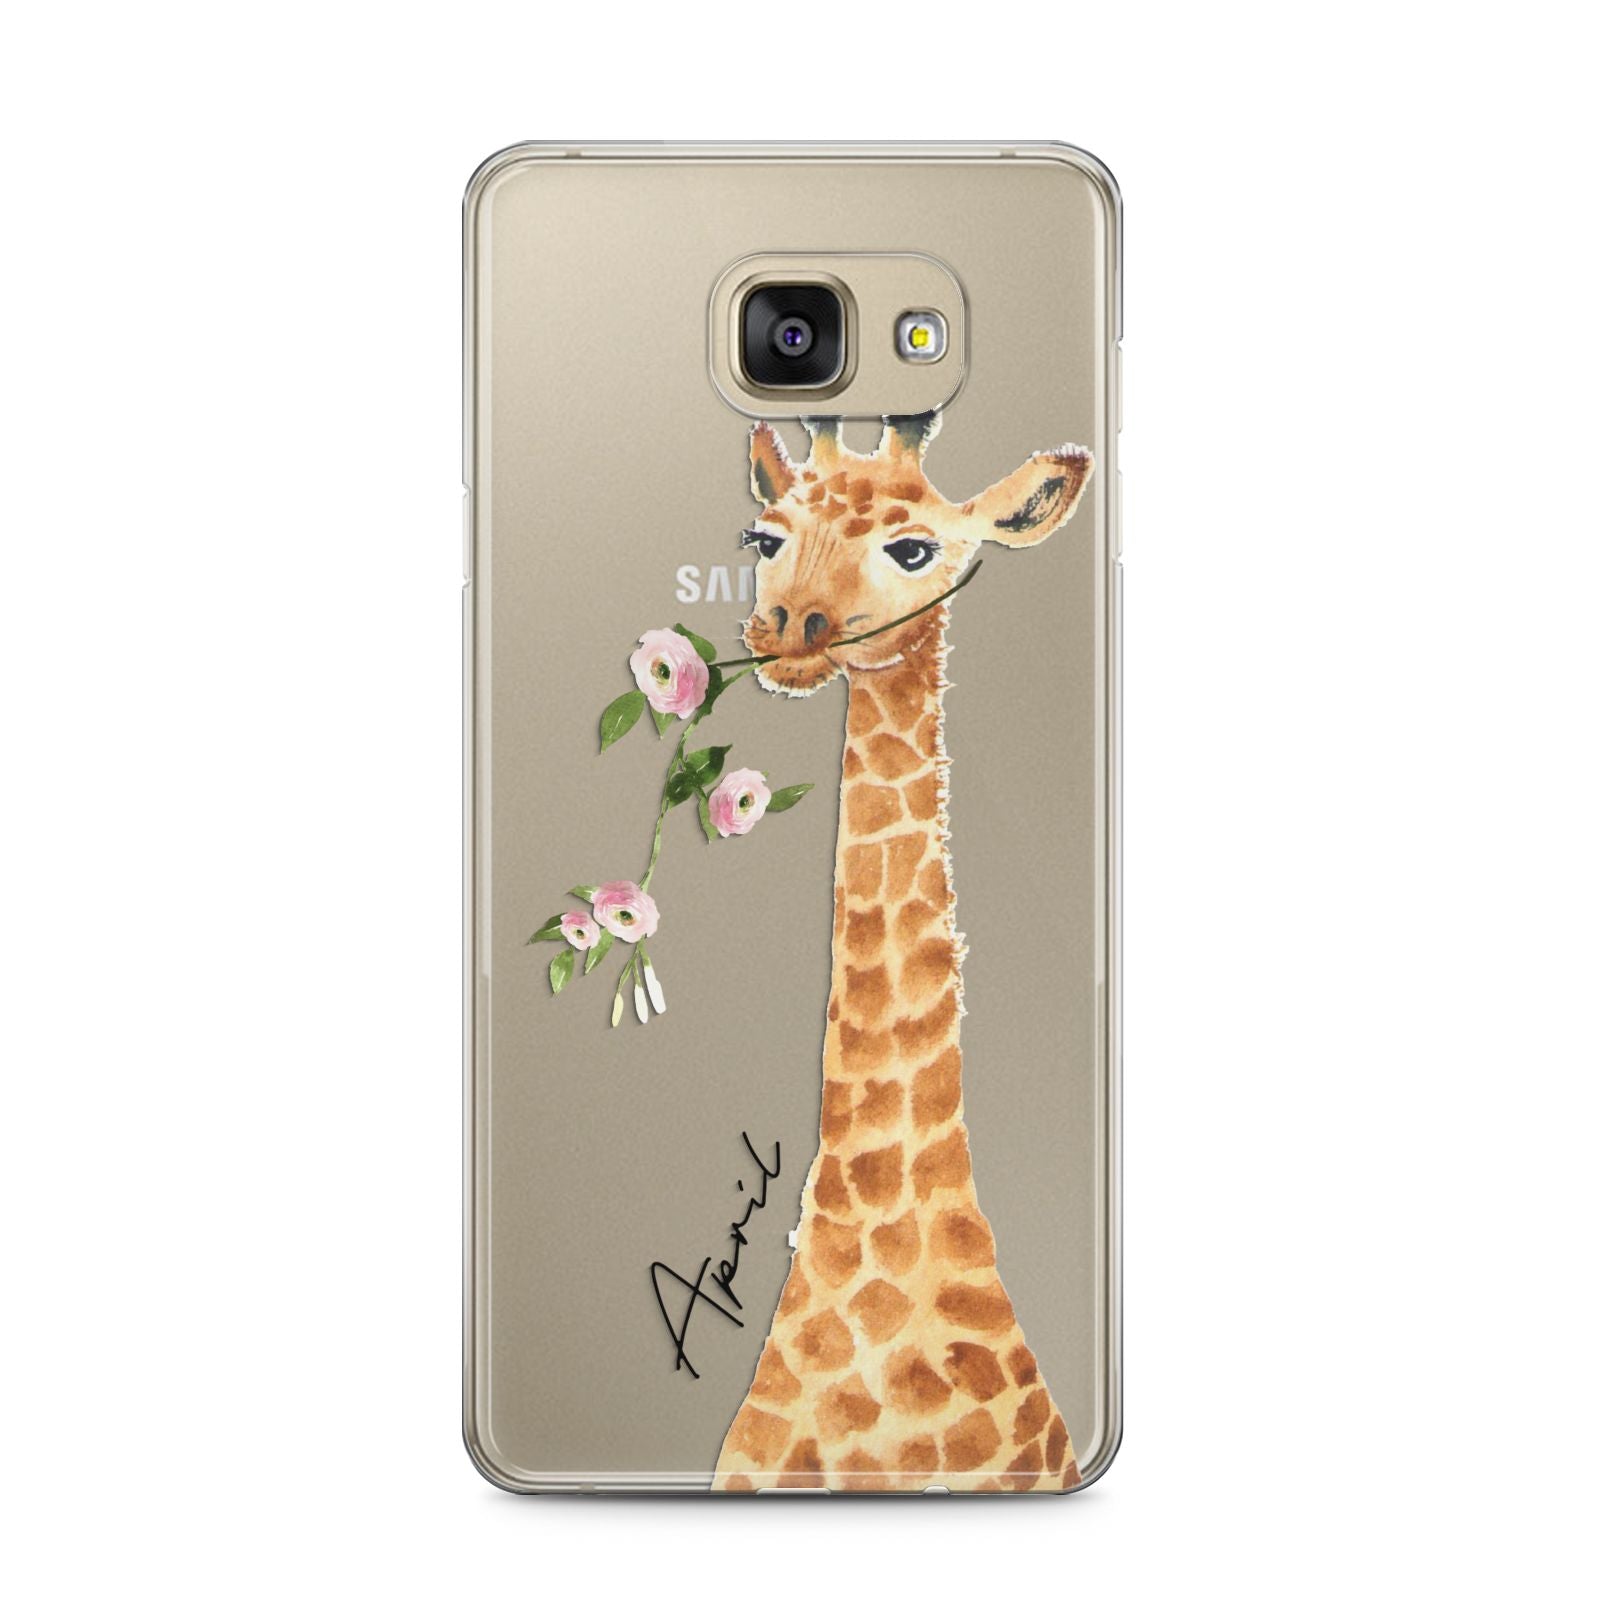 Personalised Giraffe with Name Samsung Galaxy A5 2016 Case on gold phone